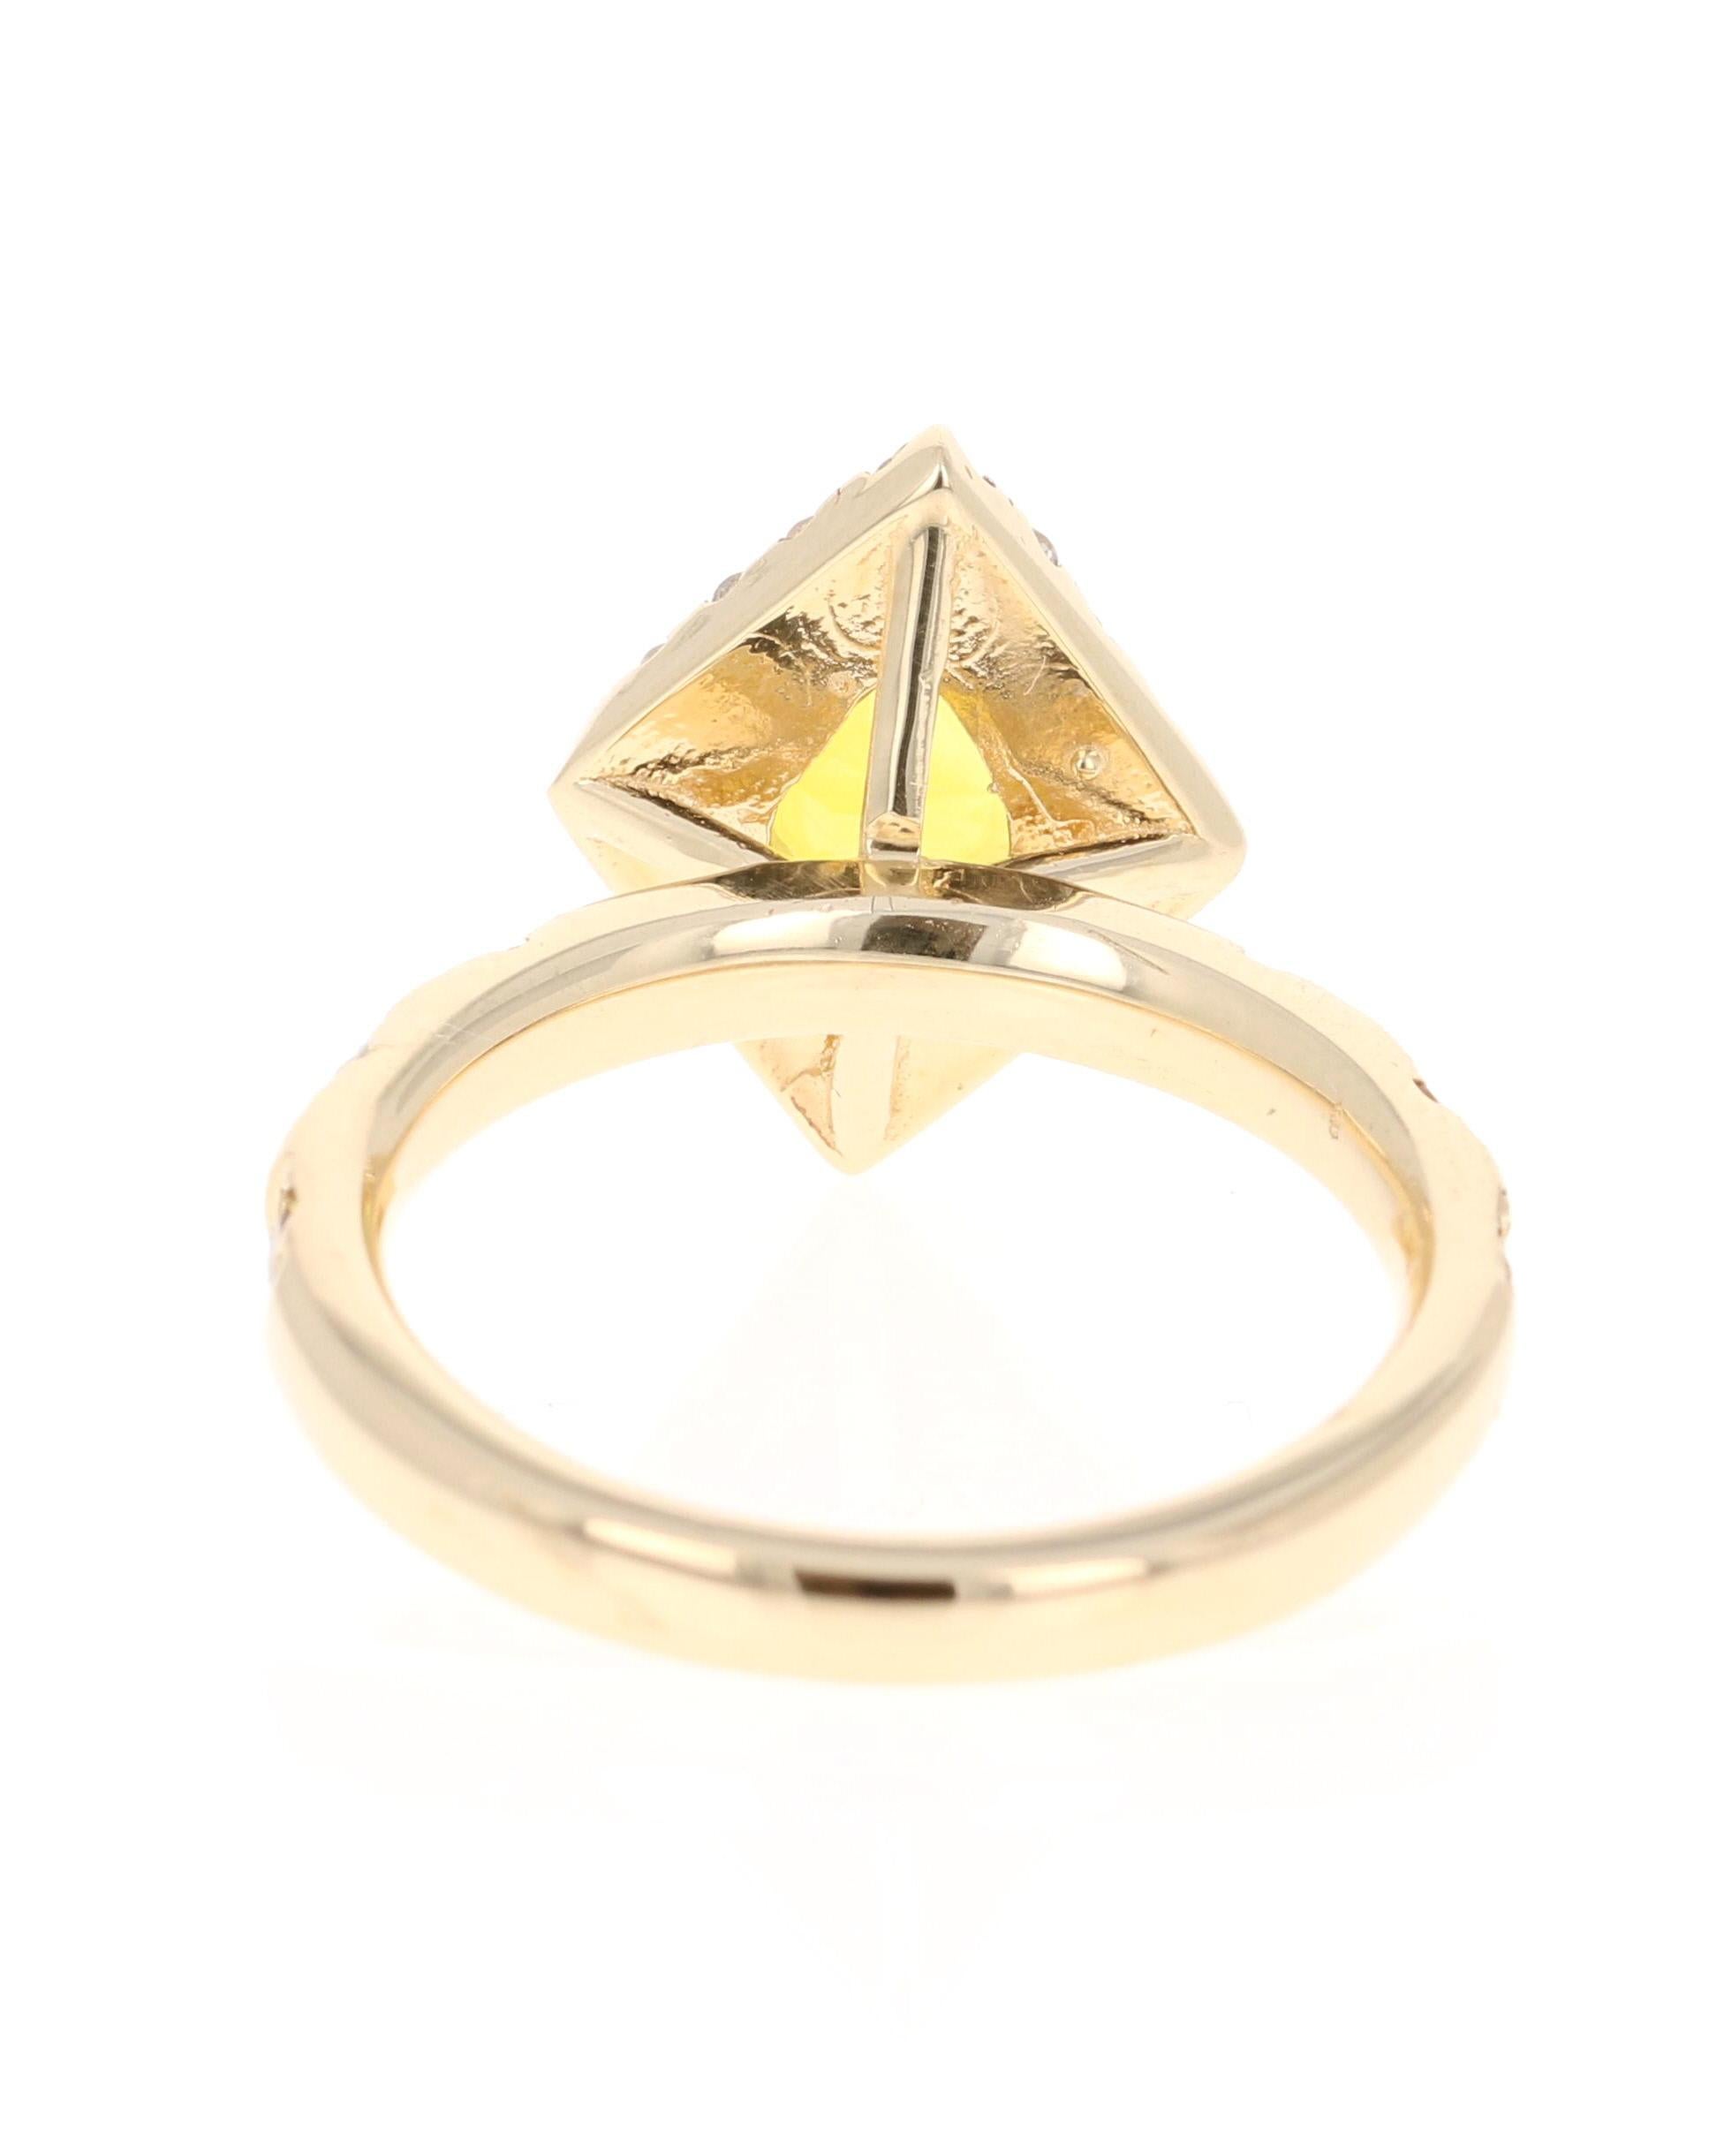 Pear Cut 2.01 Carat Yellow Sapphire and Diamond 14 Karat Yellow Gold Ring For Sale